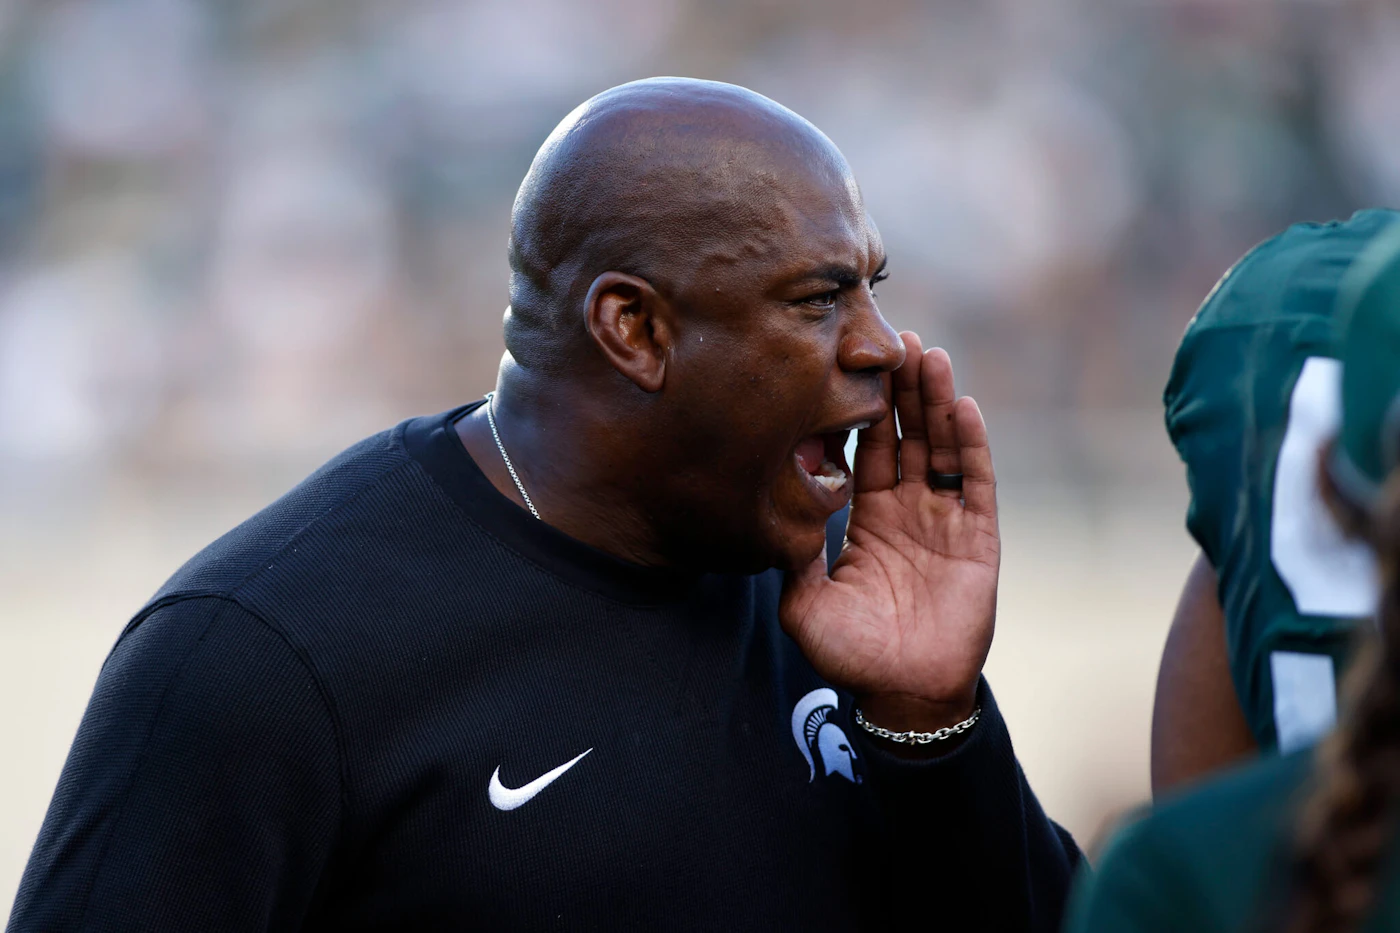 Michigan State coach Mel Tucker yells during the second half of an NCAA college football game against Richmond, Saturday, Sept. 9, 2023, in East Lansing, Mich. Michigan State won 45-14. (AP Photo/Al Goldis)